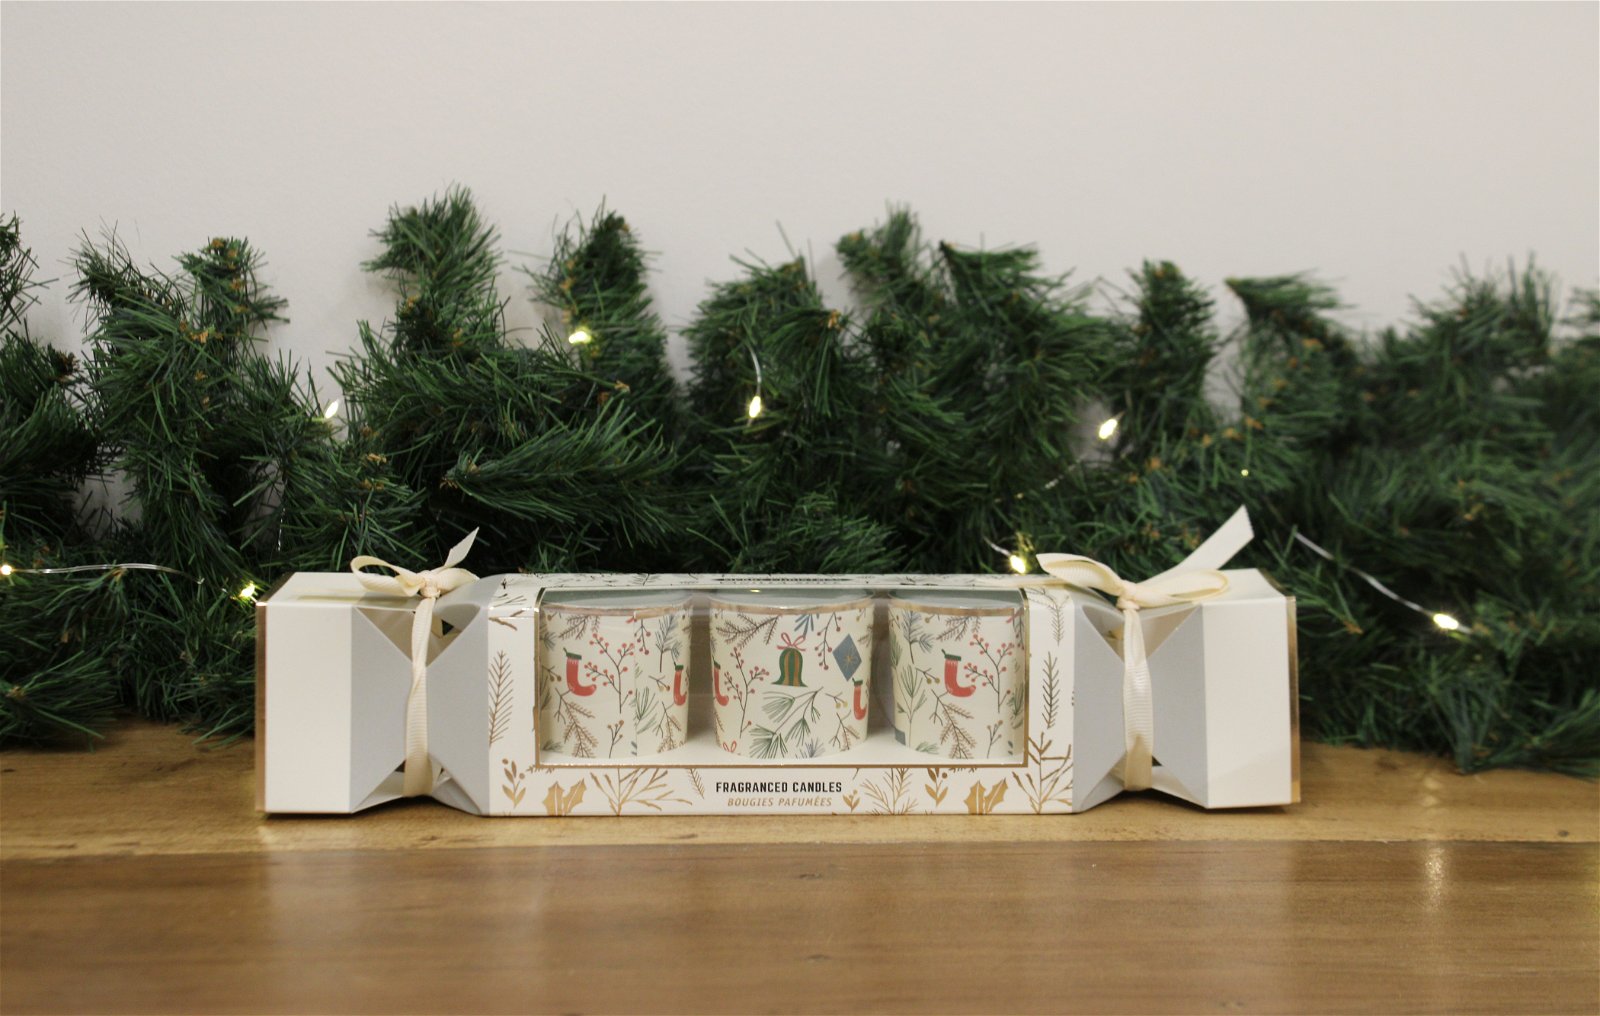 Cracker Gift-box with Vanilla Spice Candle-pots - a Cheeky Plant